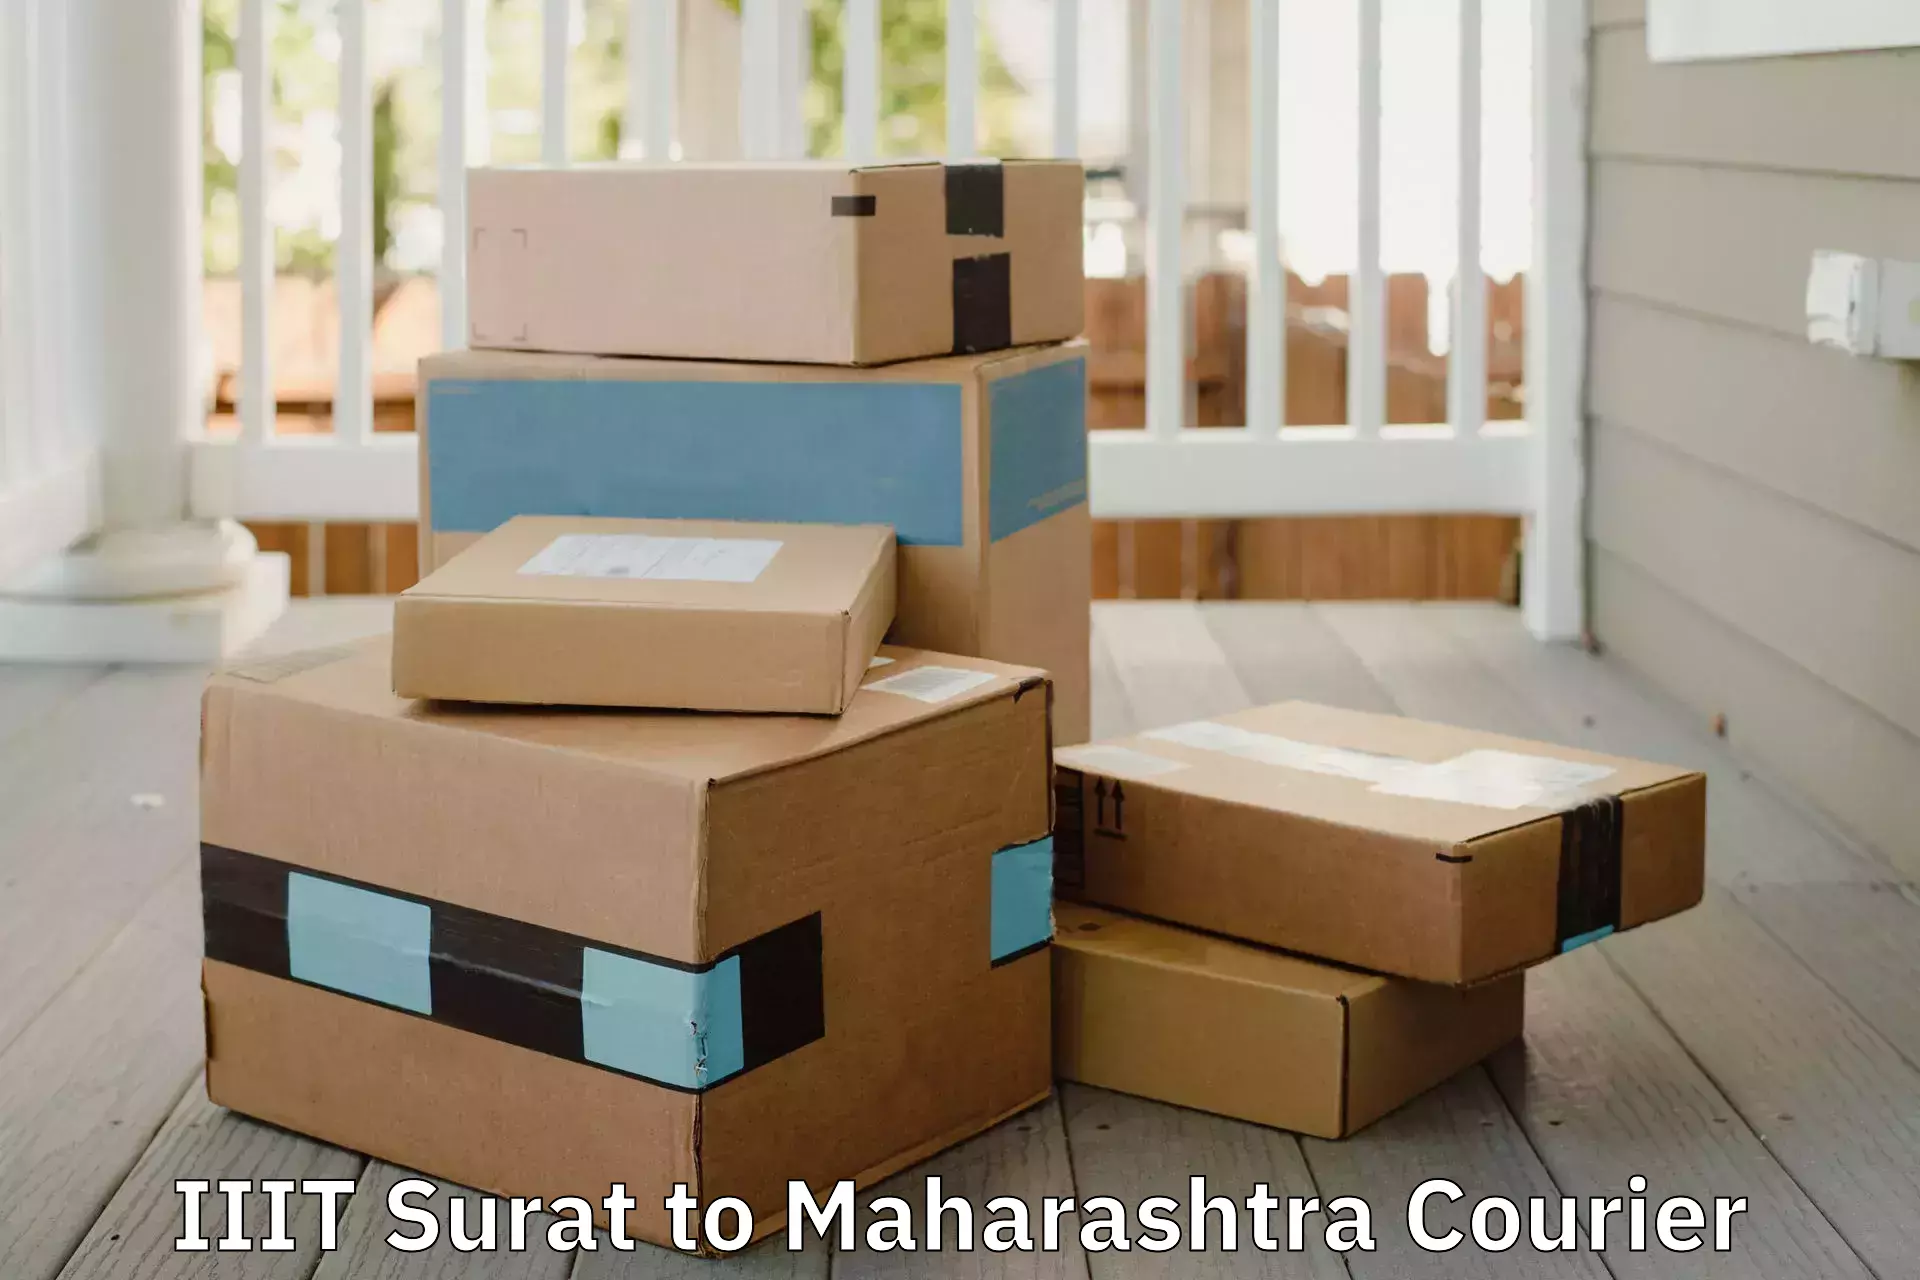 Personalized relocation plans IIIT Surat to Maharashtra